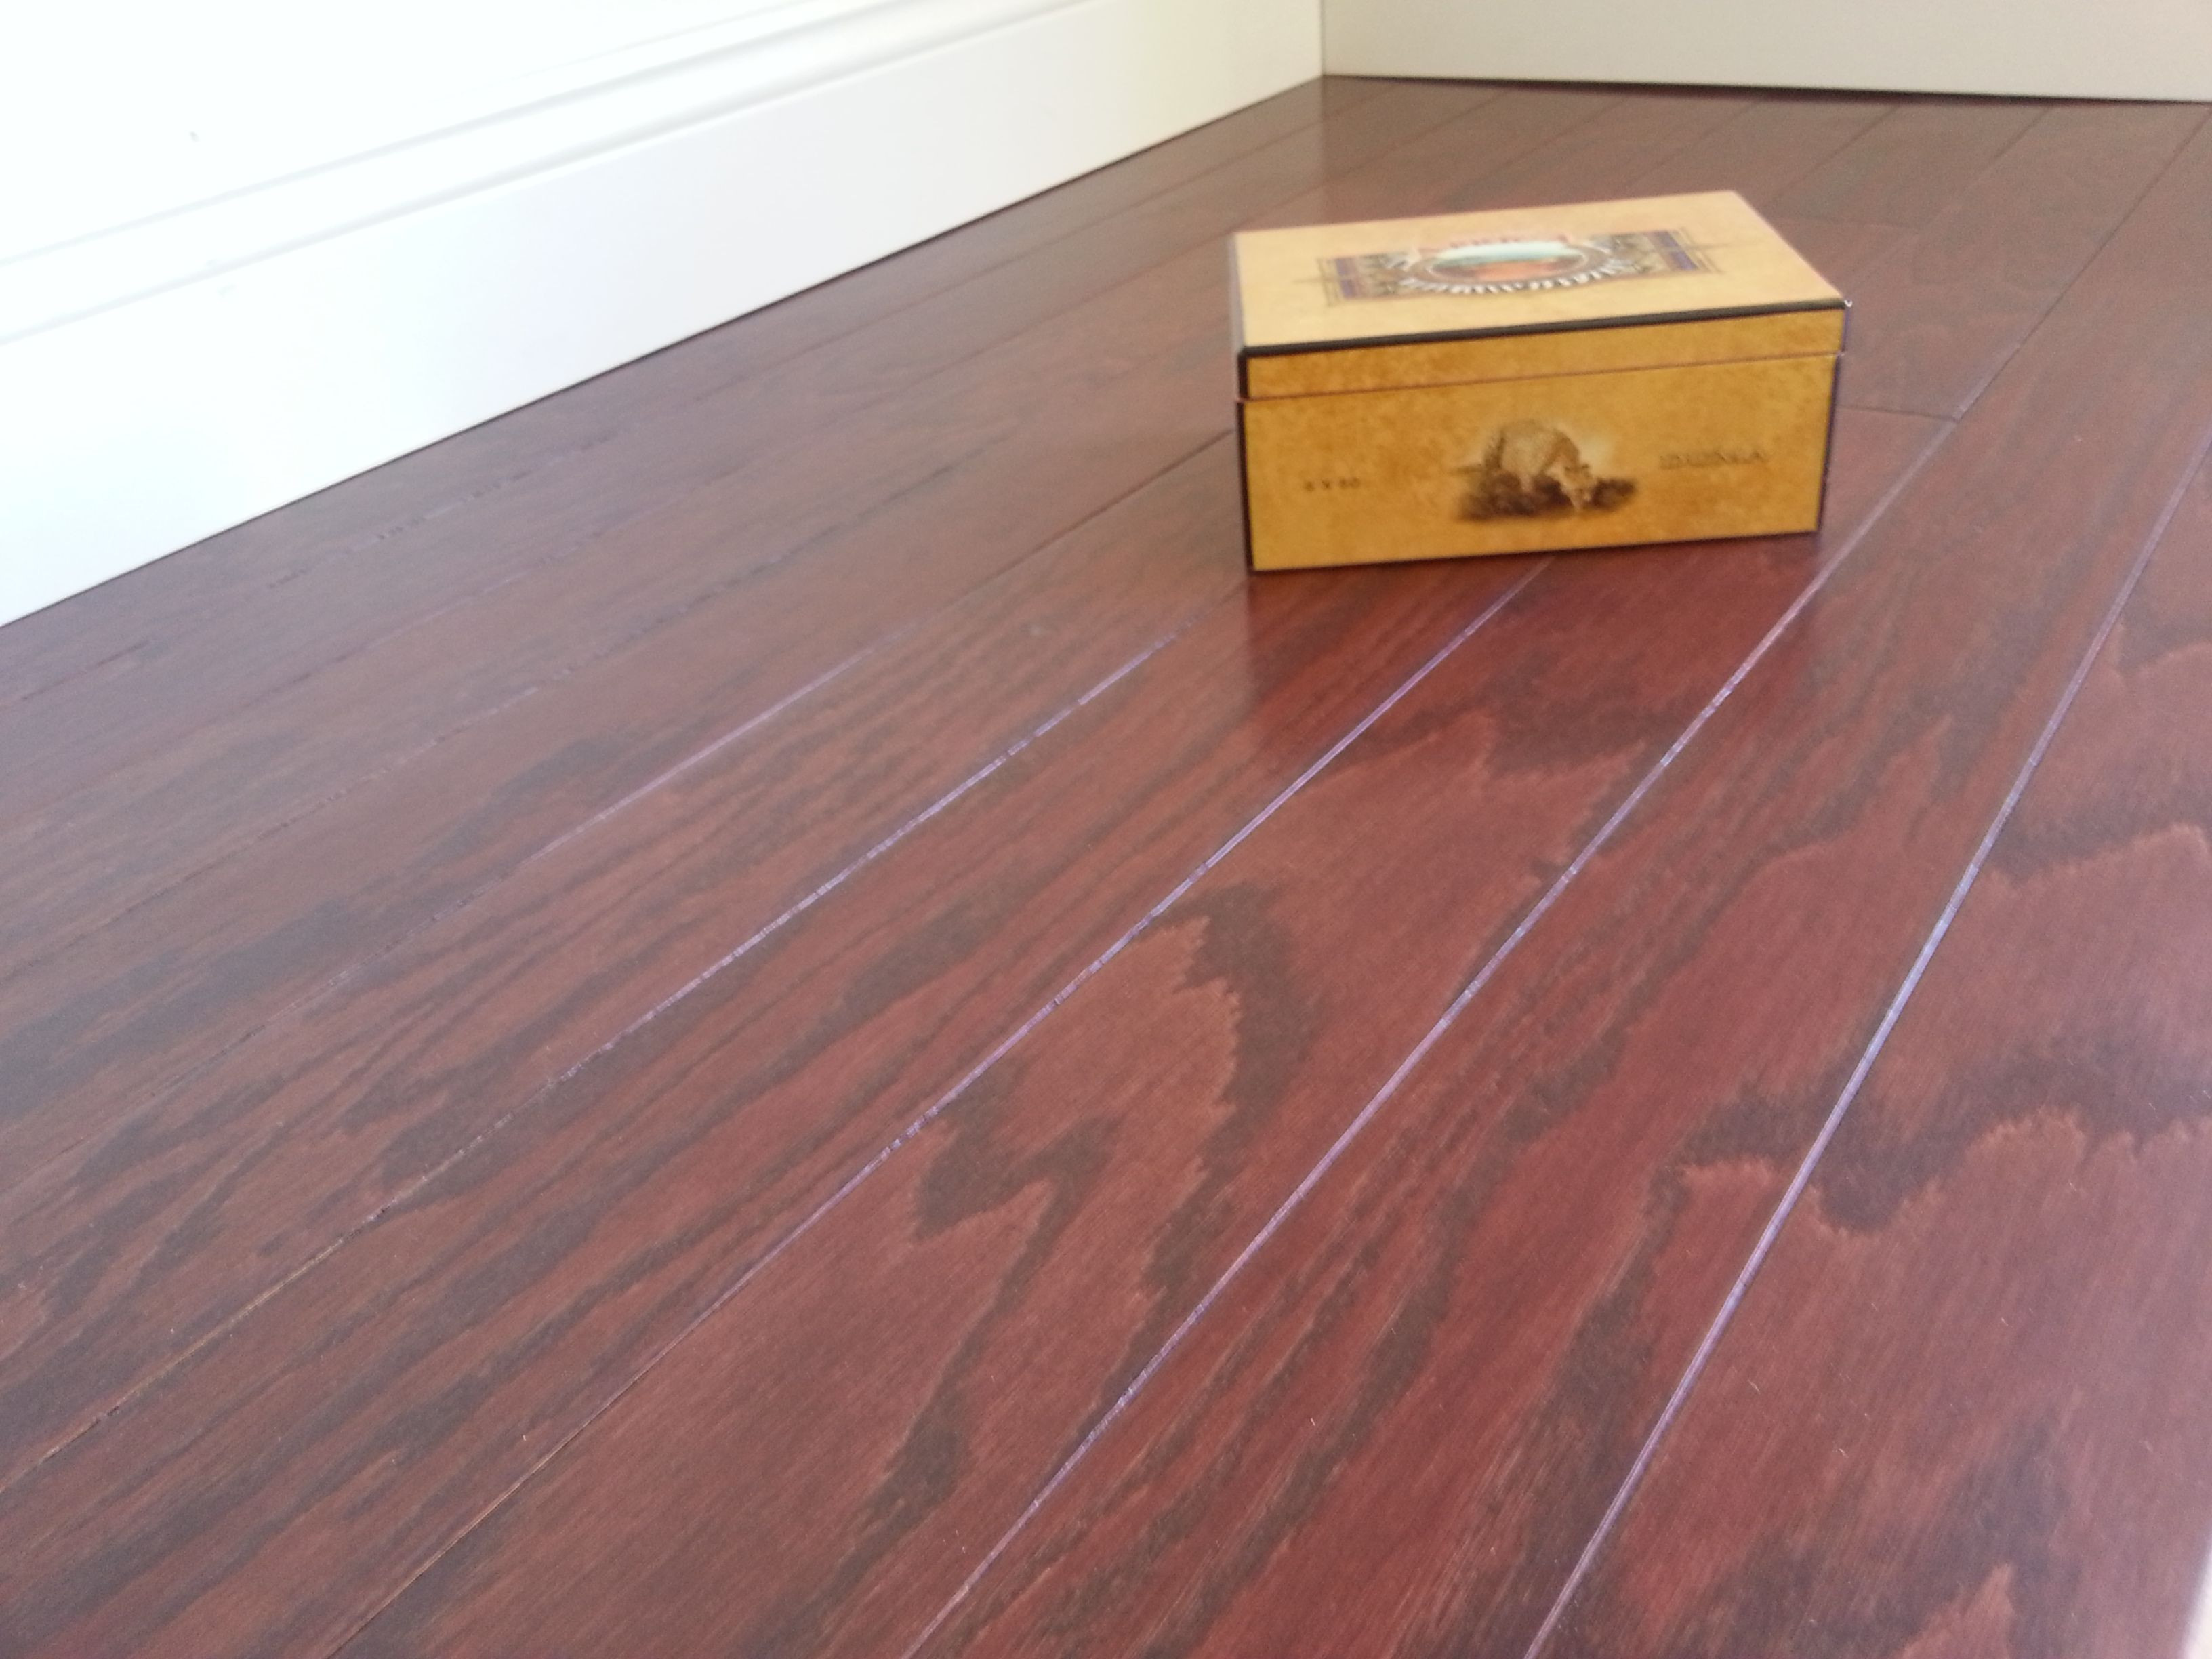 24 Recommended 3 4 Bamboo Hardwood Flooring 2024 free download 3 4 bamboo hardwood flooring of 3 1 4 symphonic engineered oak merlot hardwood flooring as low as intended for 3 1 4 symphonic engineered oak merlot hardwood flooring as low as 3 23 sf